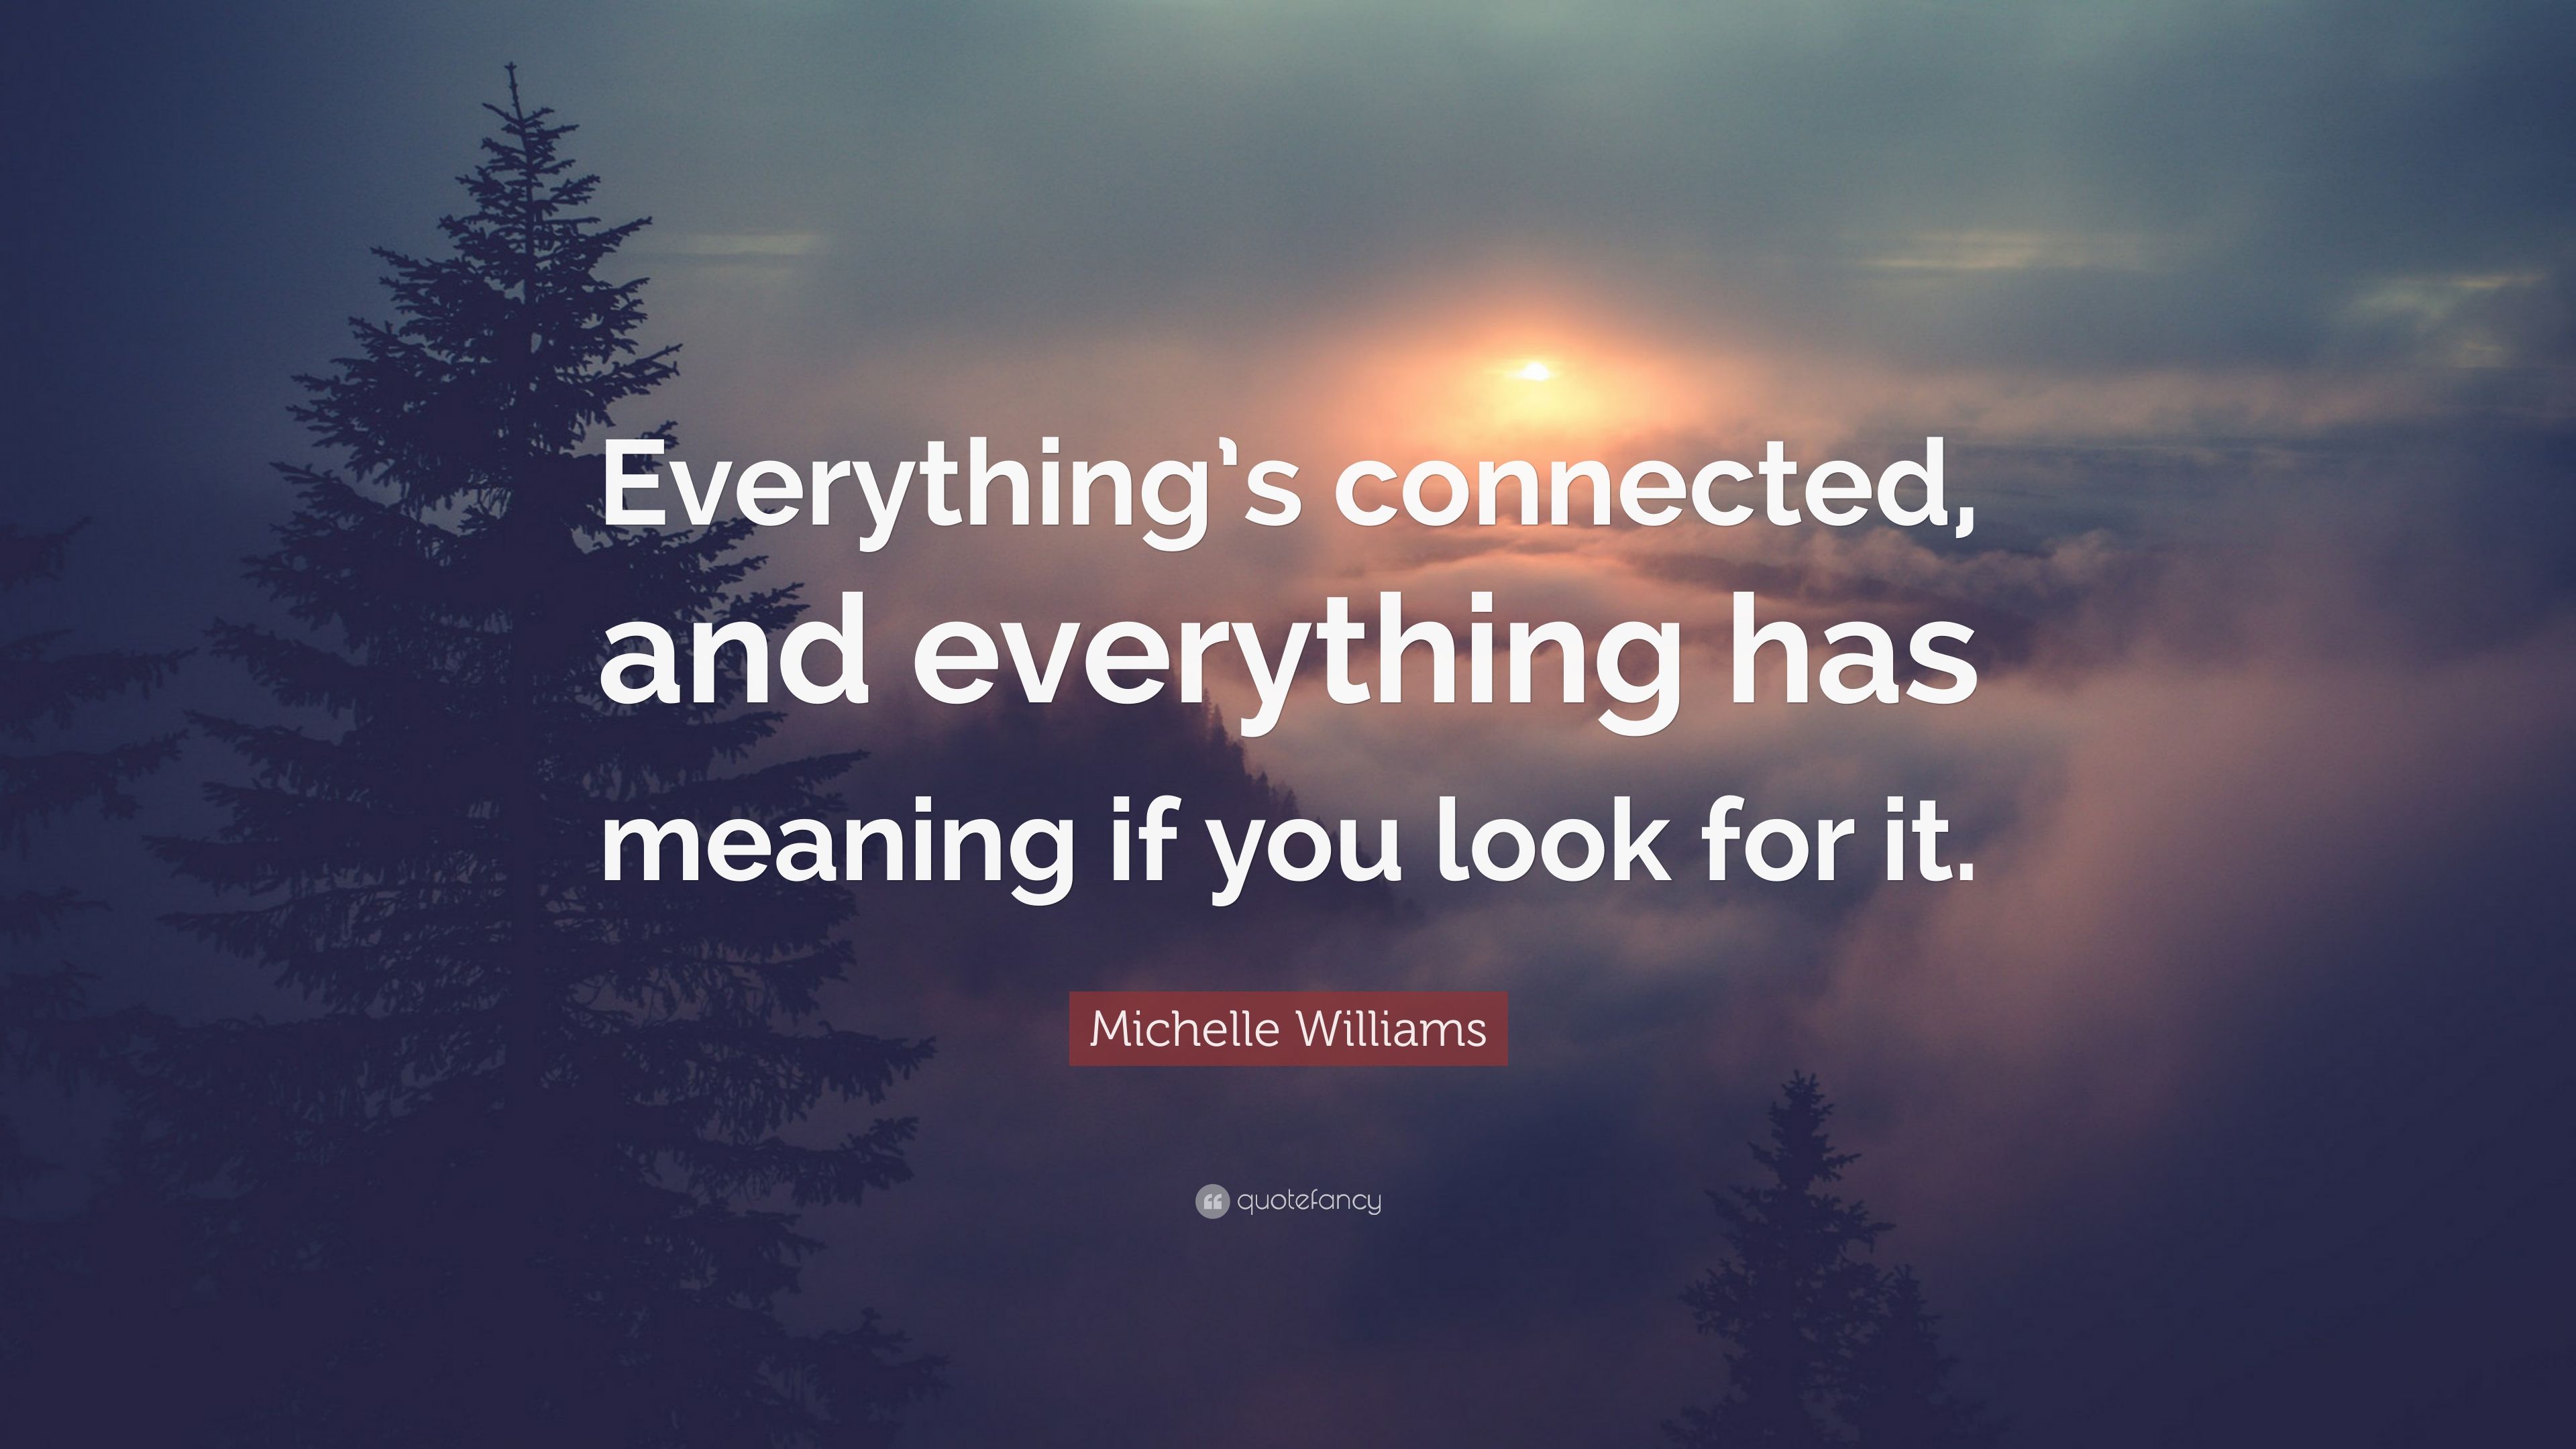 Michelle Williams Quote: “Everything's connected, and everything has meaning if you look for it.” (7 wallpaper)